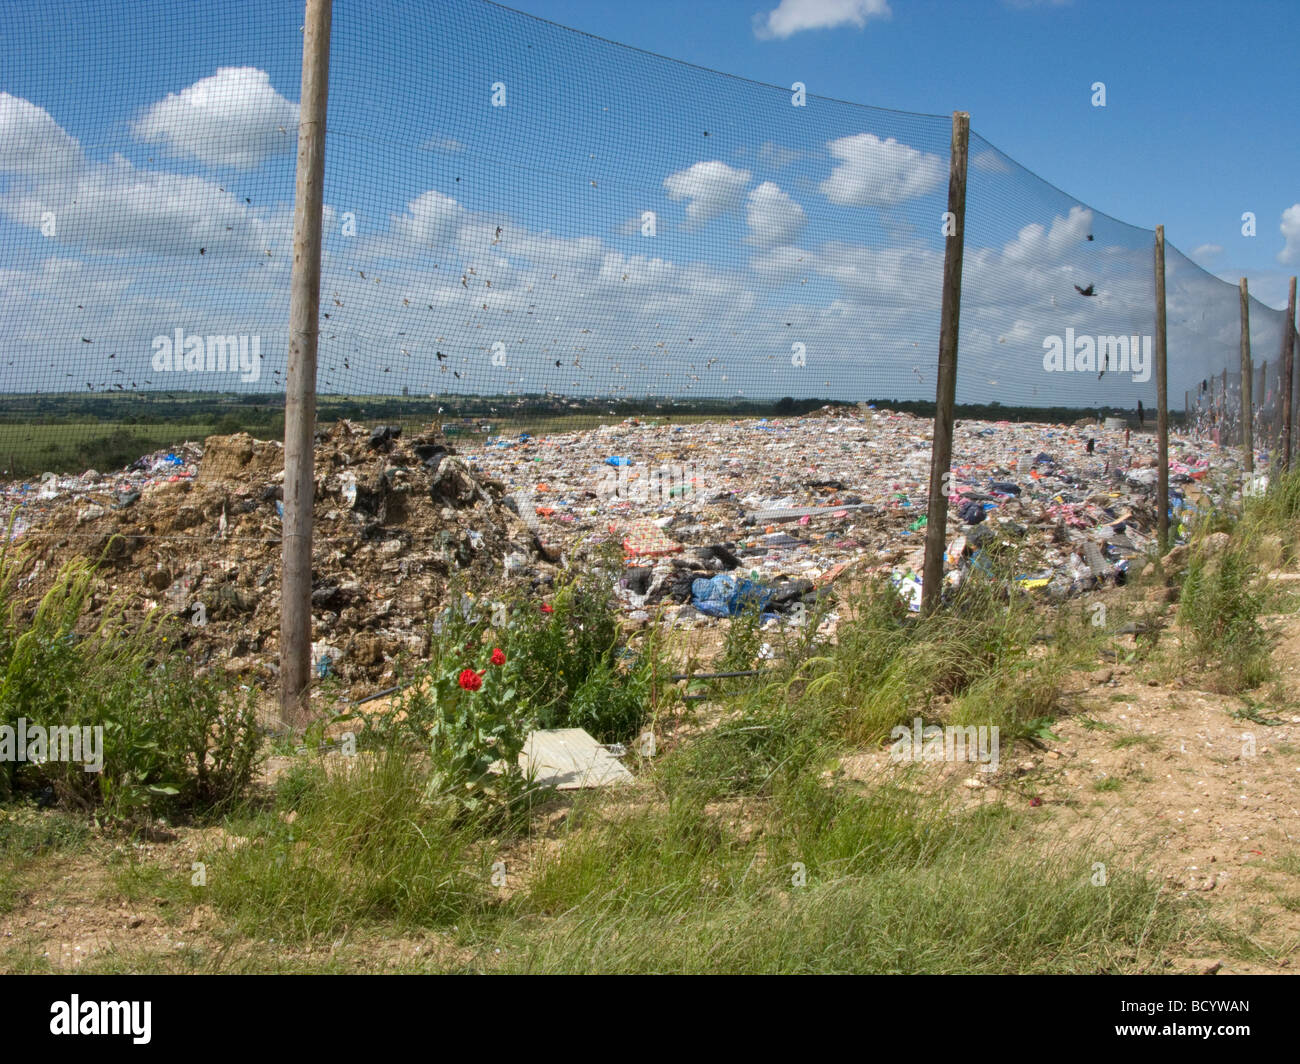 Birds congregate at a landfill site, Hertfordshire, UK Stock Photo